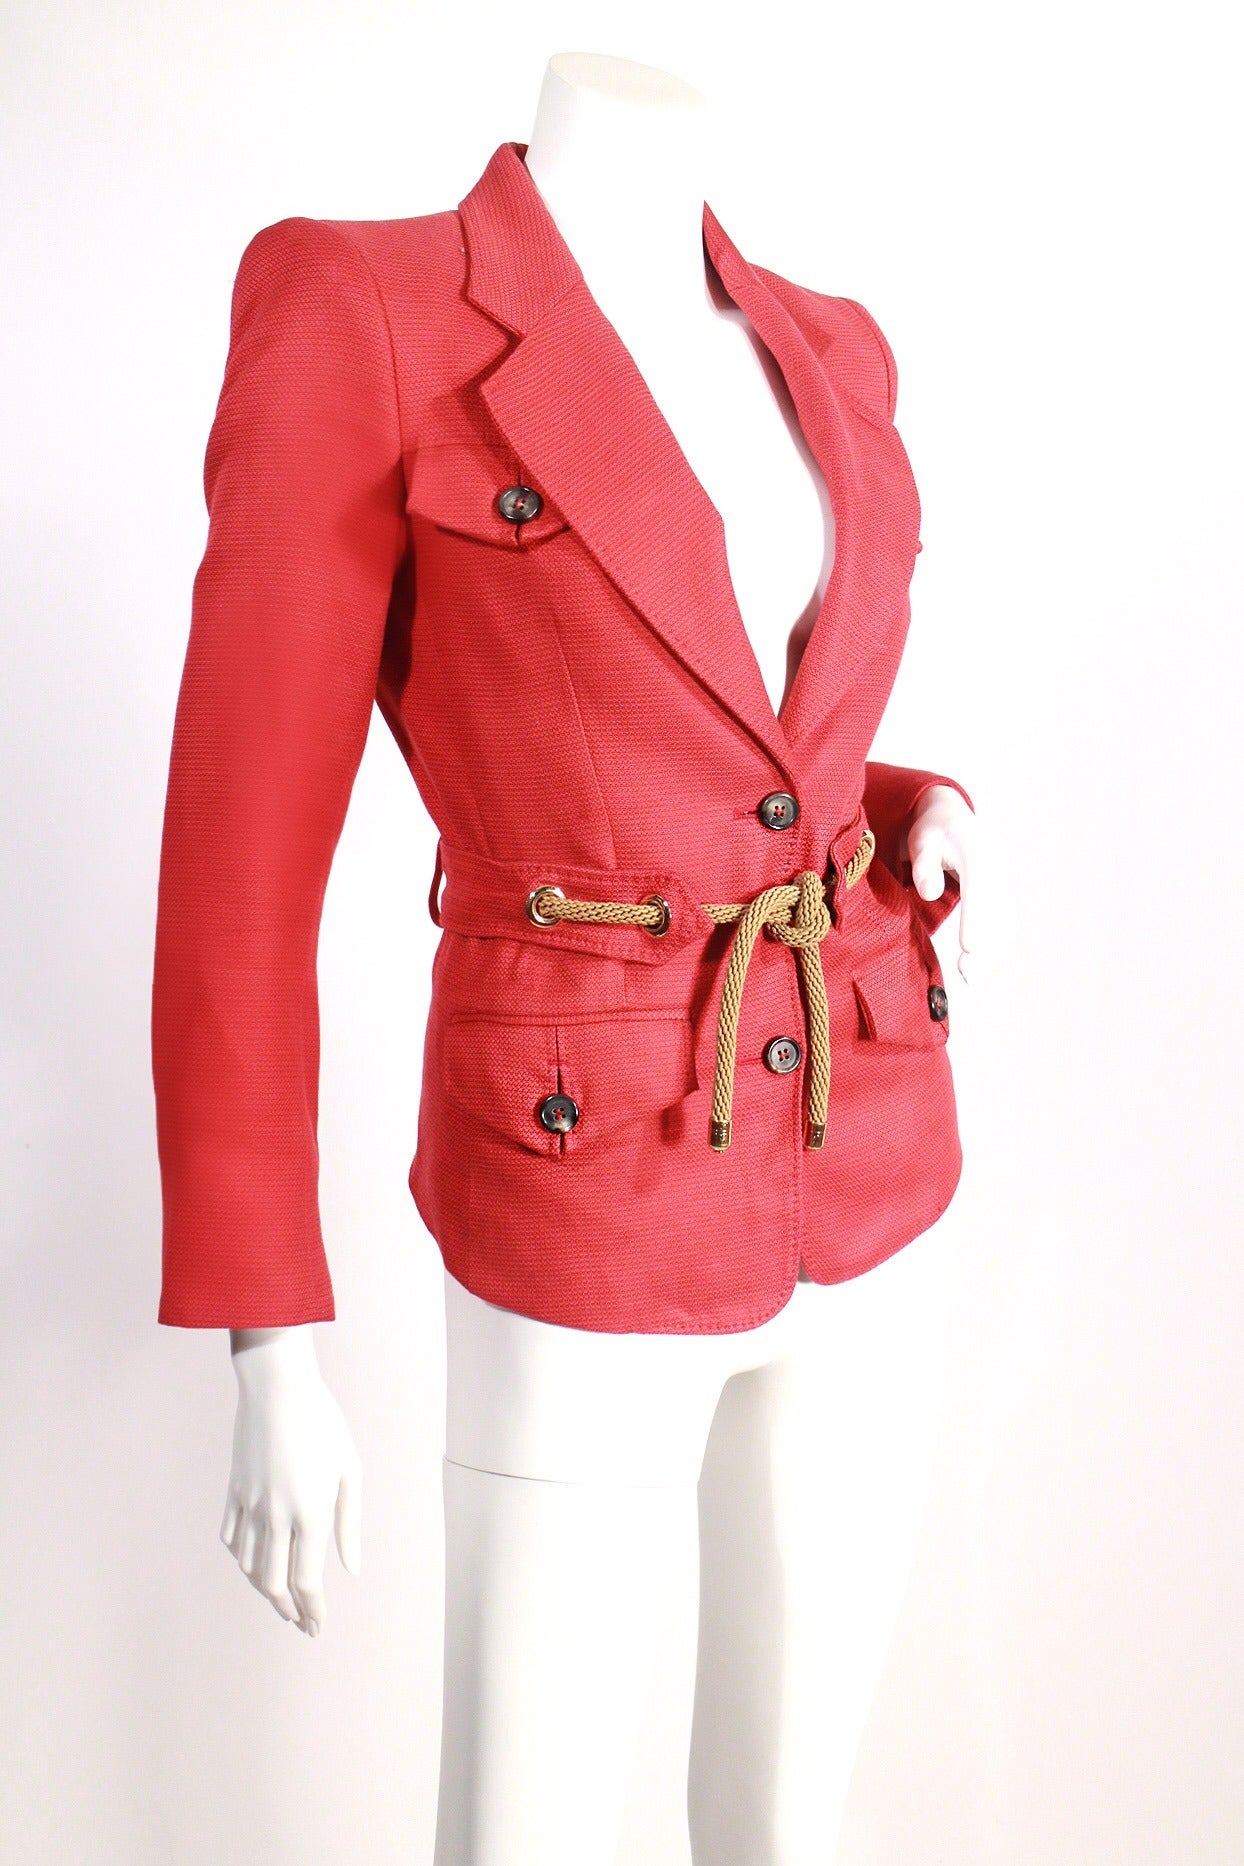 1990's Yves Saint Laurent red nautical blazer. Features three buttons, rope tie, fully lined. This blazer is perfect for summer! Extremely flattering, cinching at waist. Excellent condition. 